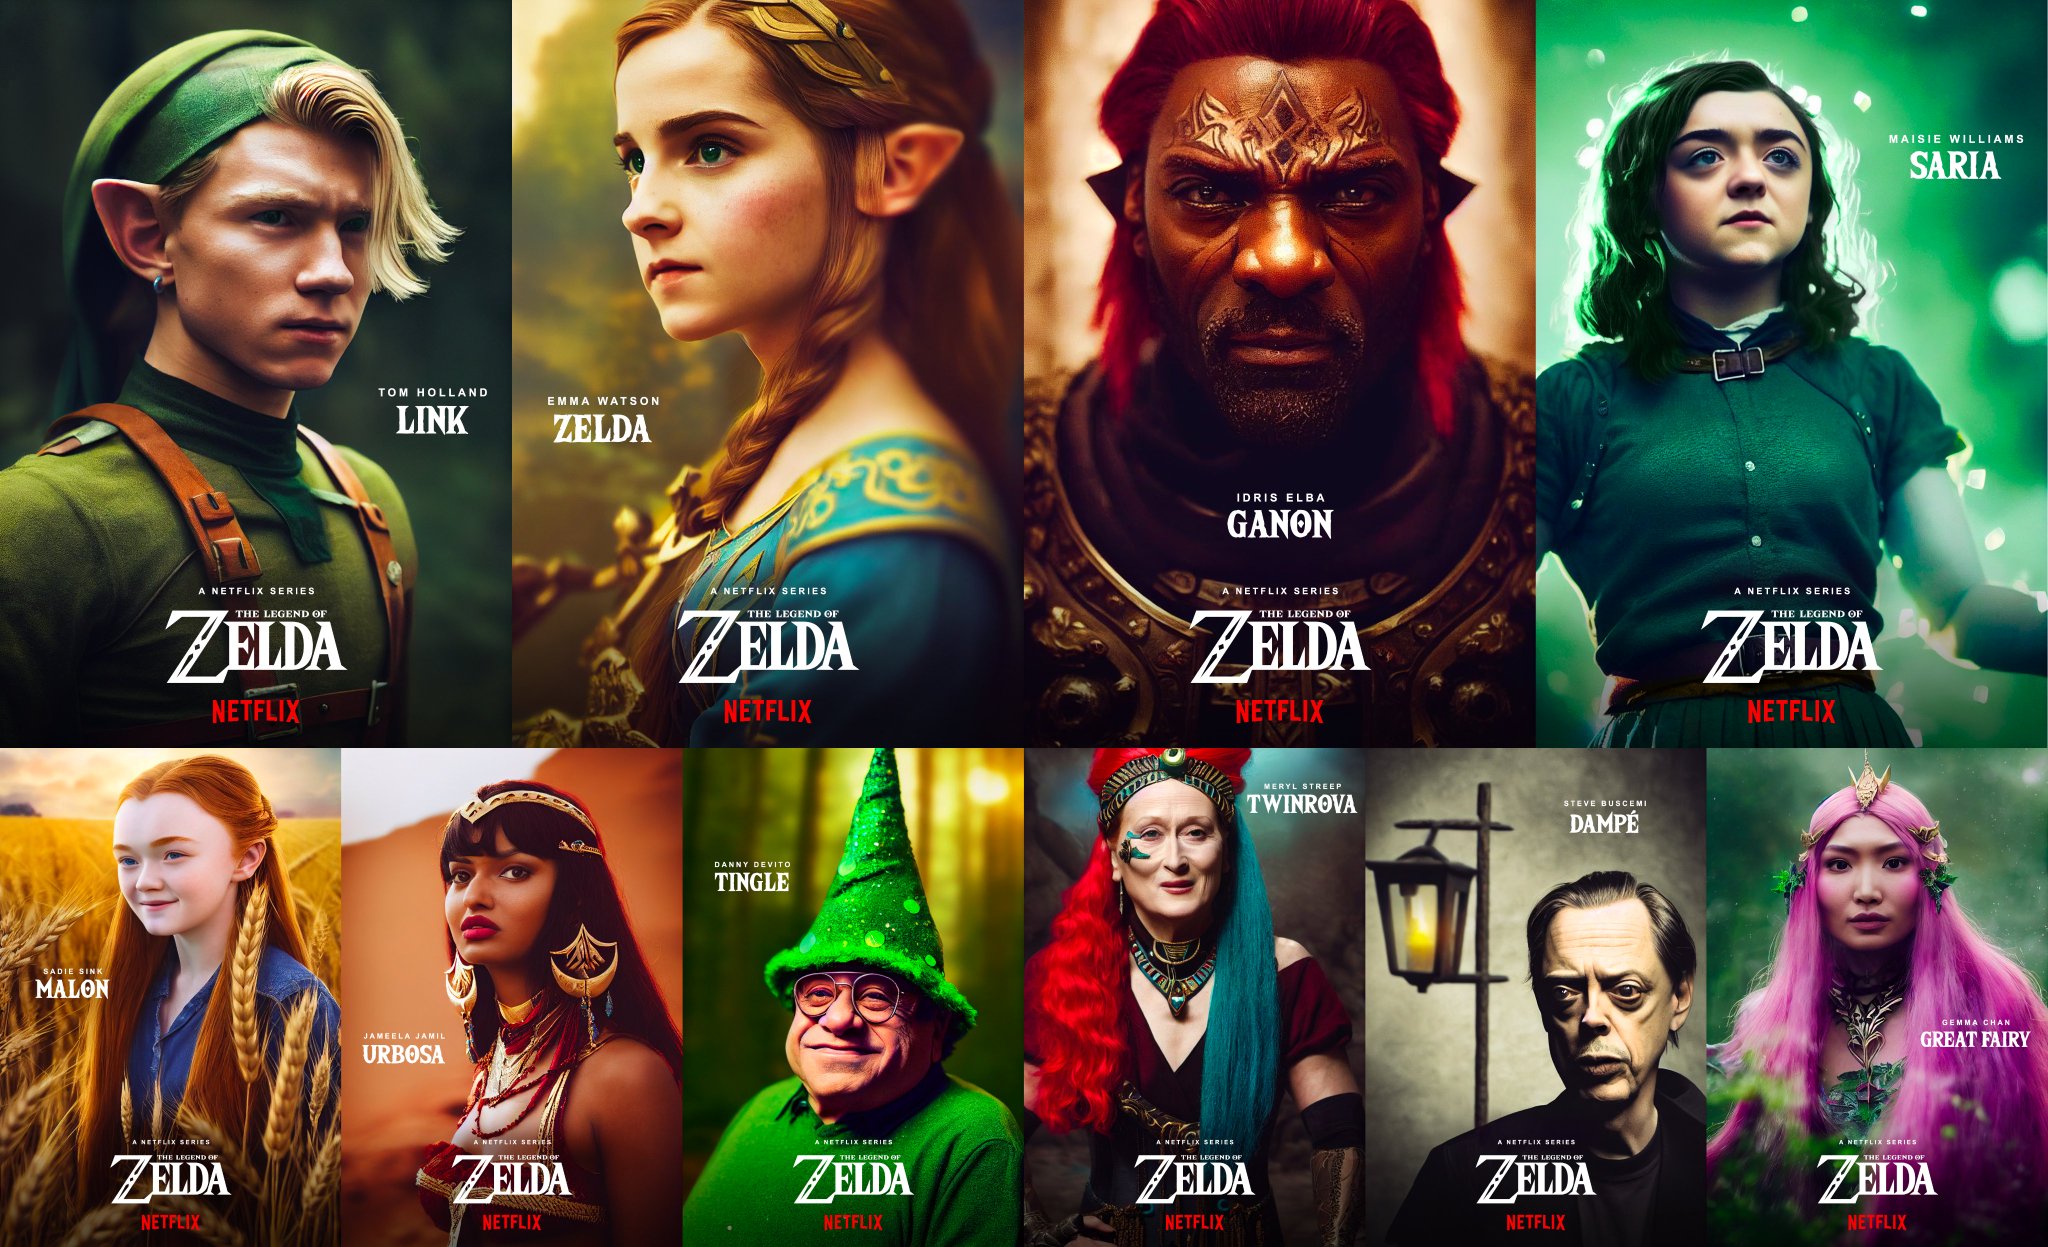 Dan Leveille on X: The full cast of @Netflix's live-action #Zelda series  just dropped, revealing an all-star cast starring @TomHolland1996,  @EmmaWatson, and @idriselba! 😱 Full posters in thread 👇 (JK. Made w/ #